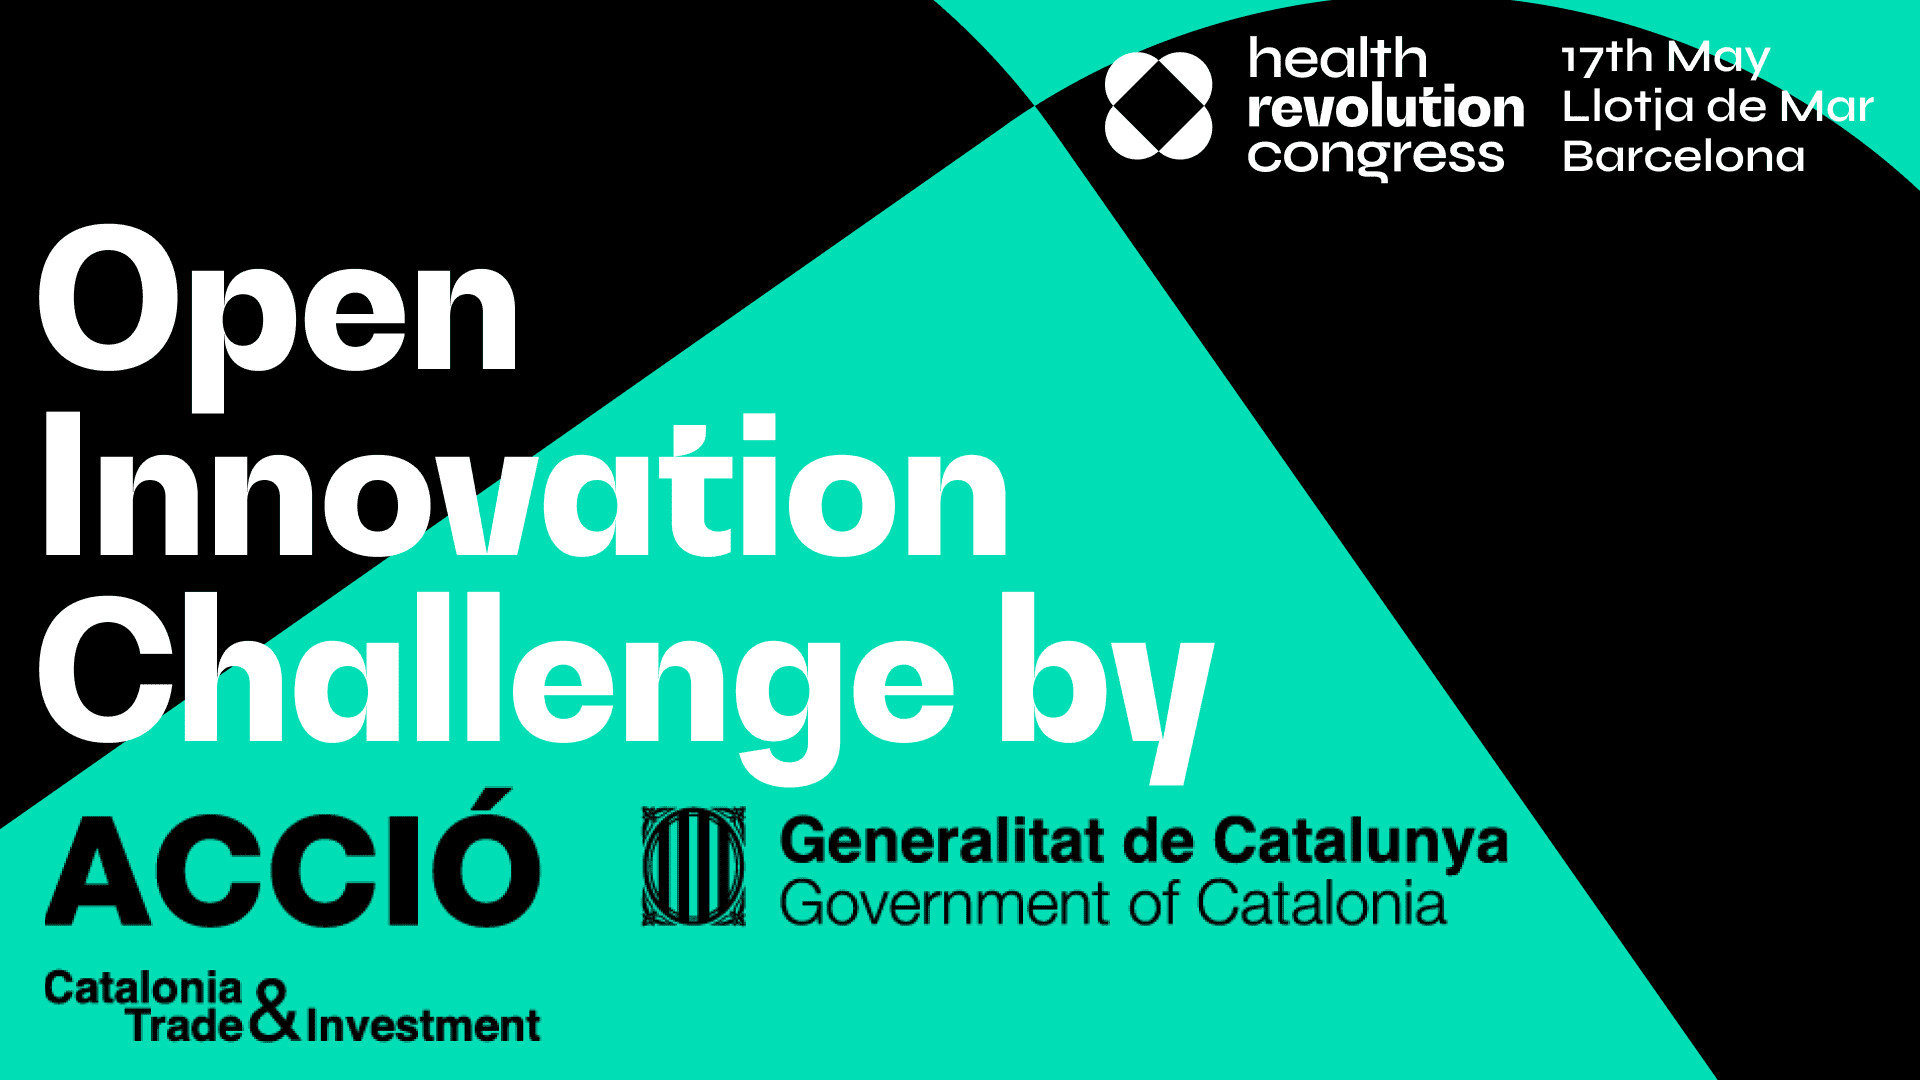 Get your solution in the game for the Open Innovation Challenge at the Health Revolution Congress